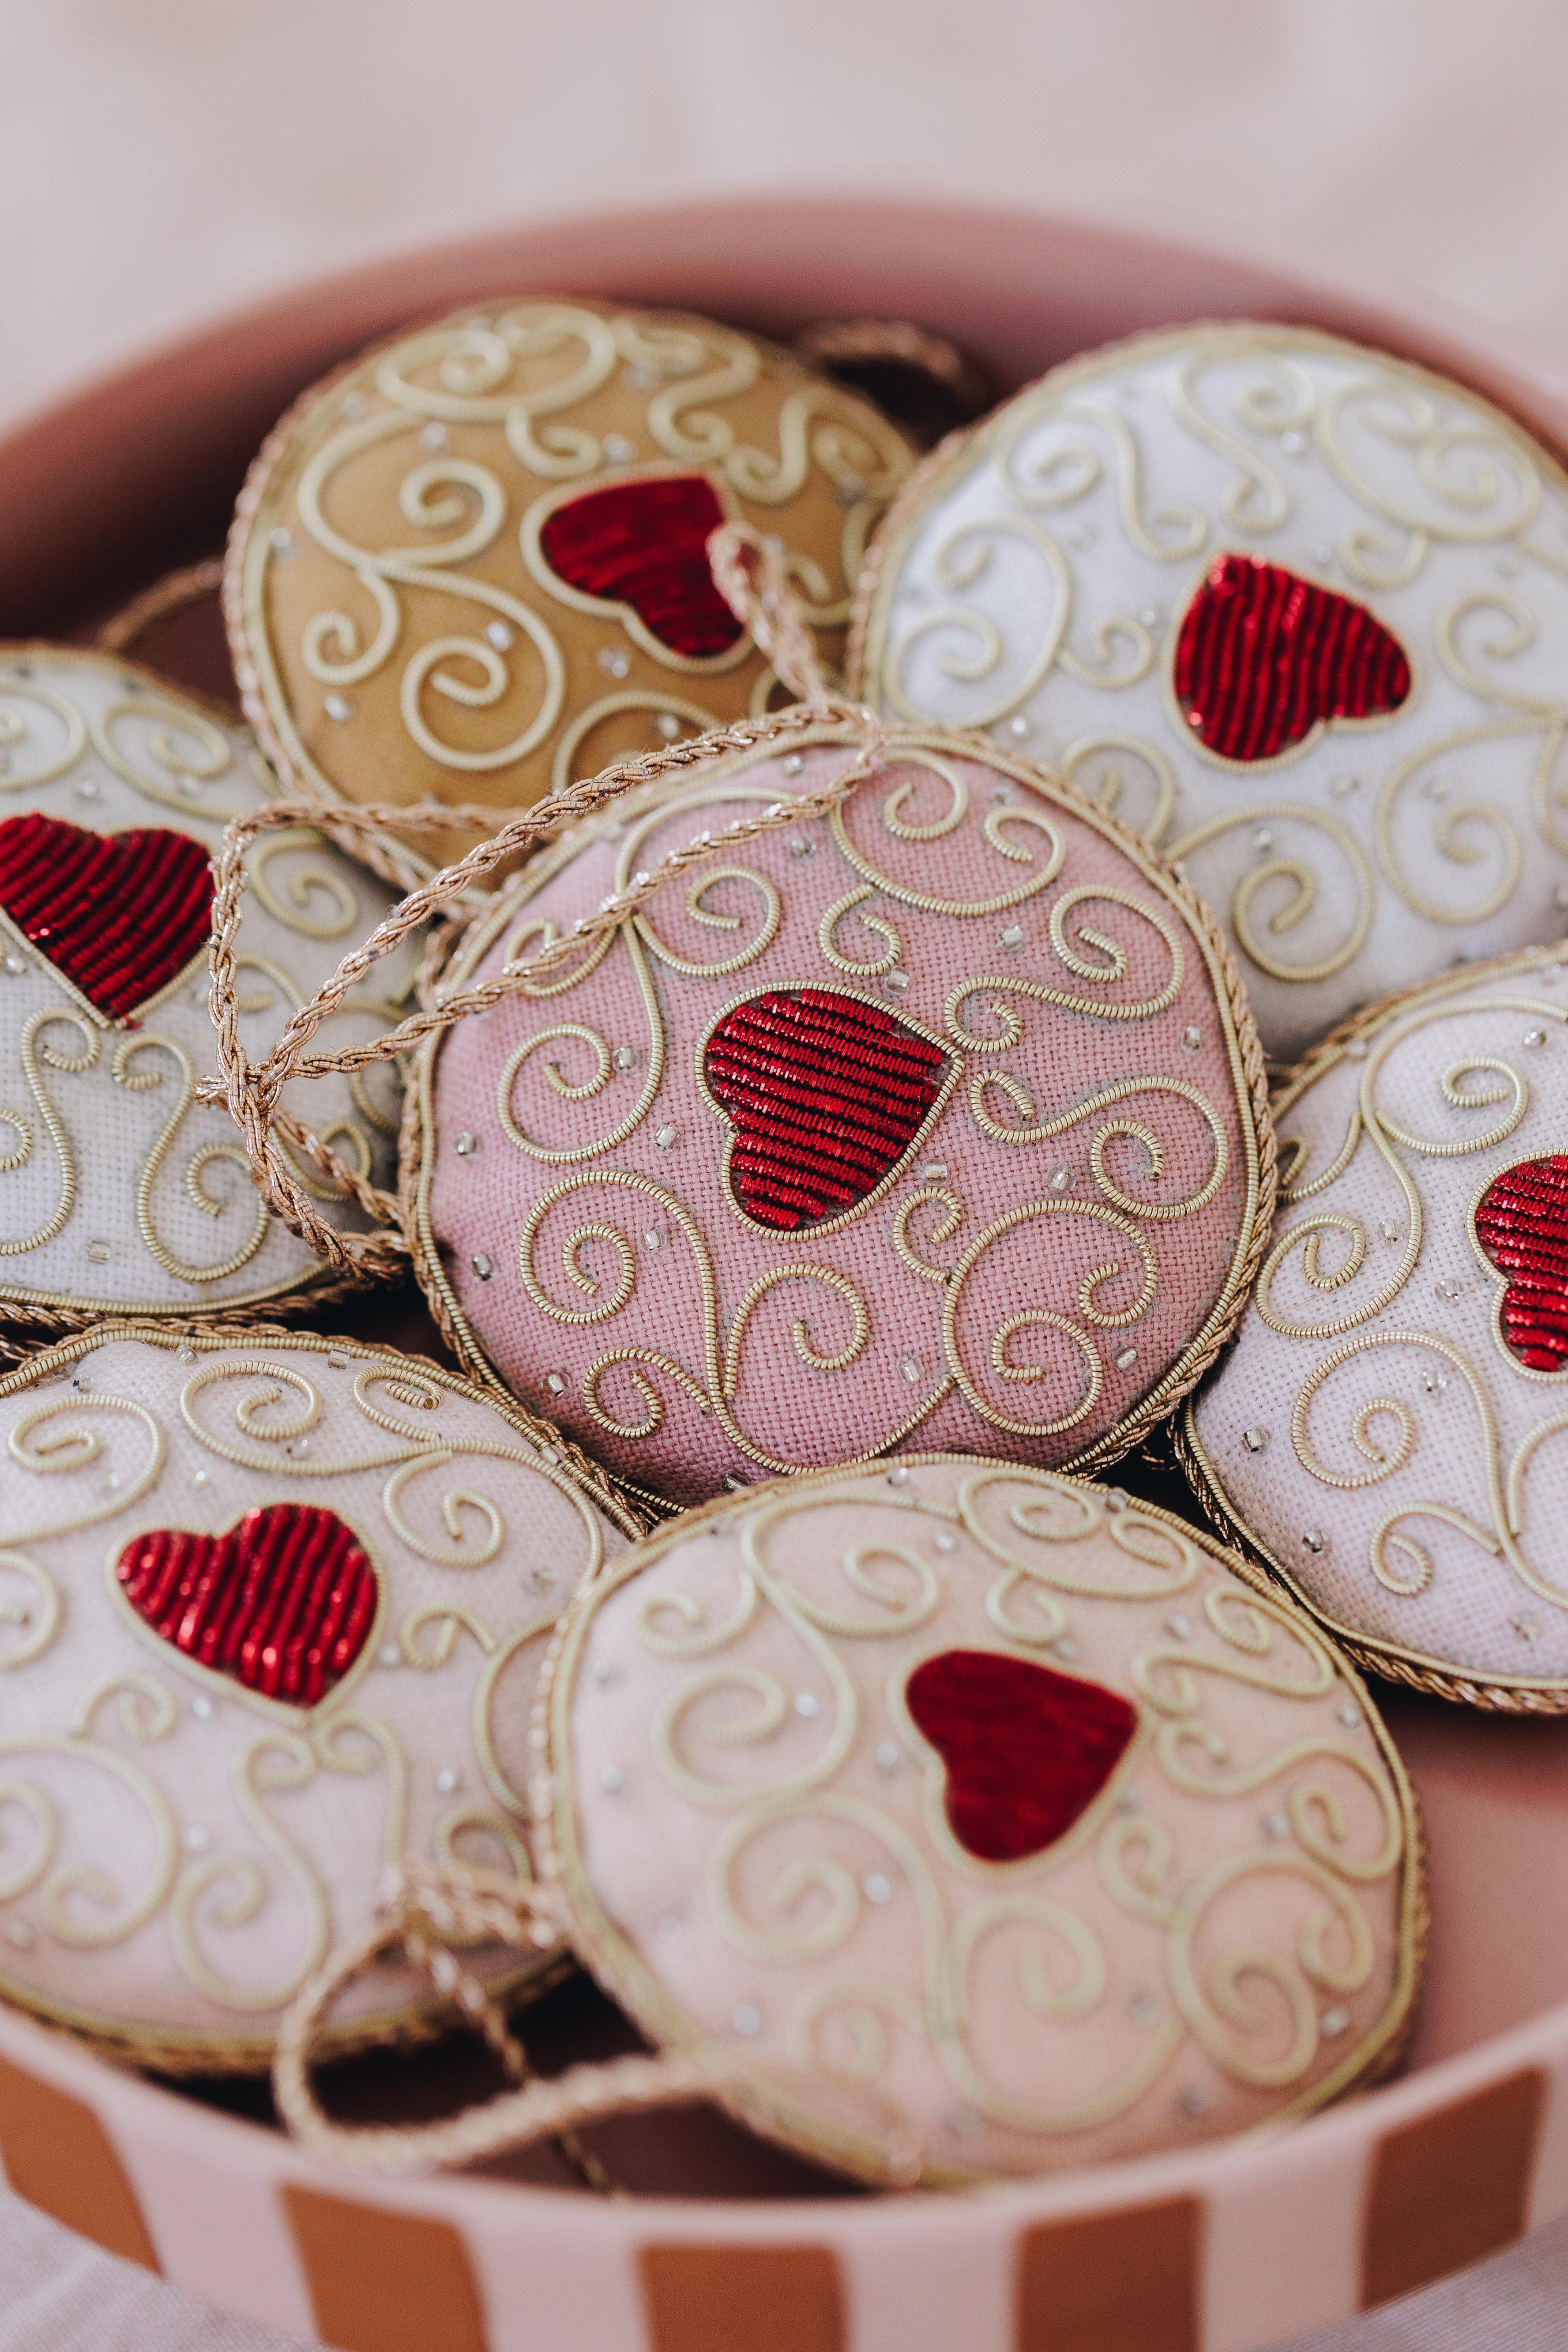 Set of 9 Christmas Ornaments Vintage Irish Linen English Biscuits Jammie Heart In Good Condition For Sale In Belfast, Northern Ireland